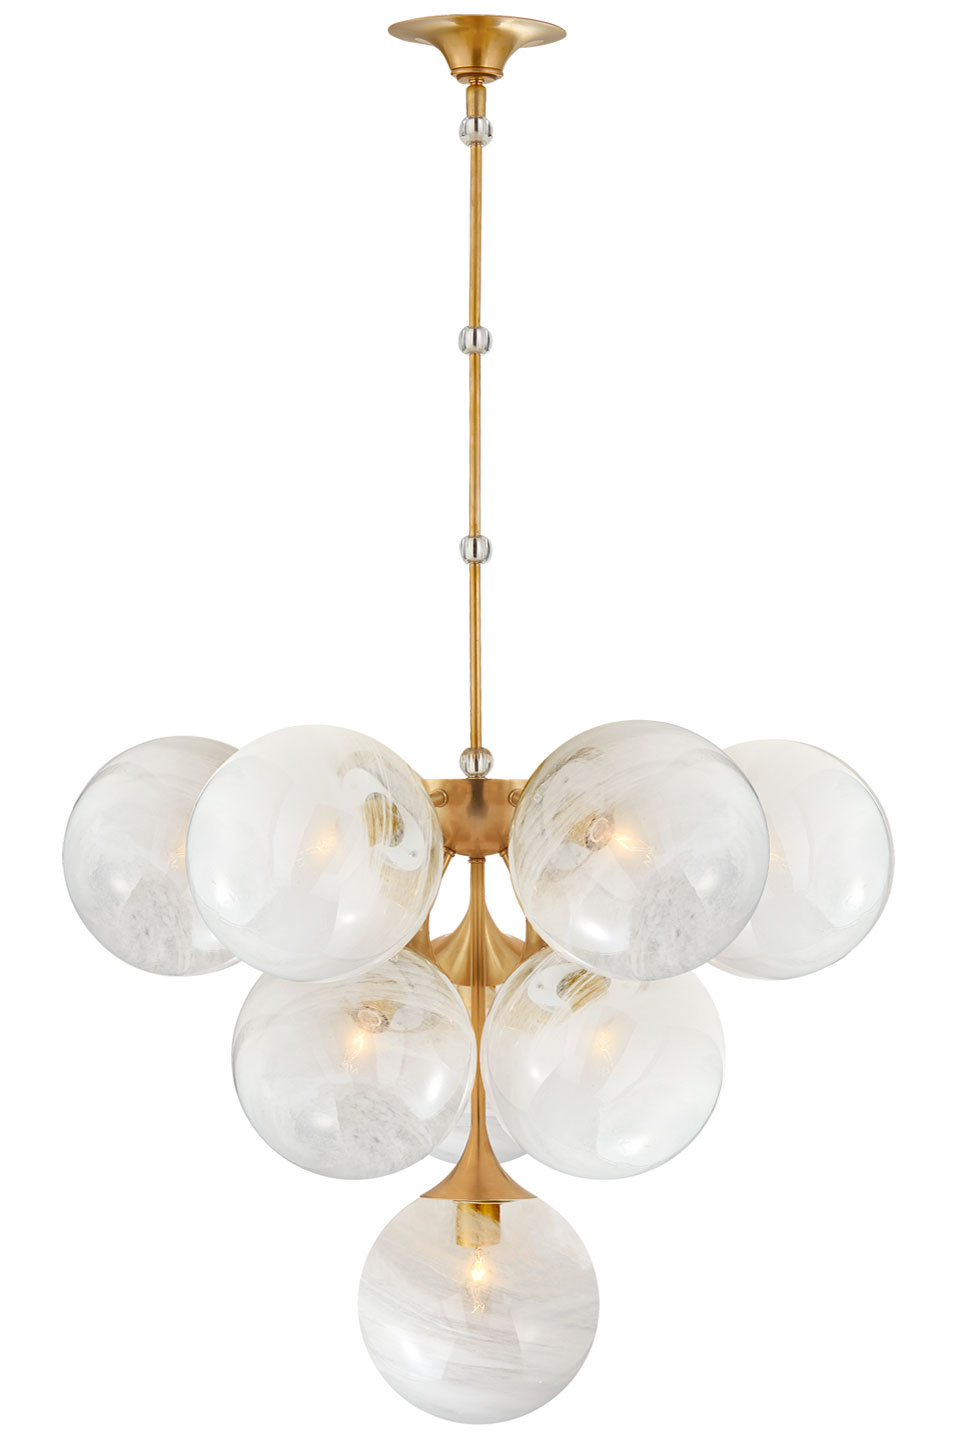 Cristol chandelier 10 lights white and gold ball. Visual Comfort&Co.. 